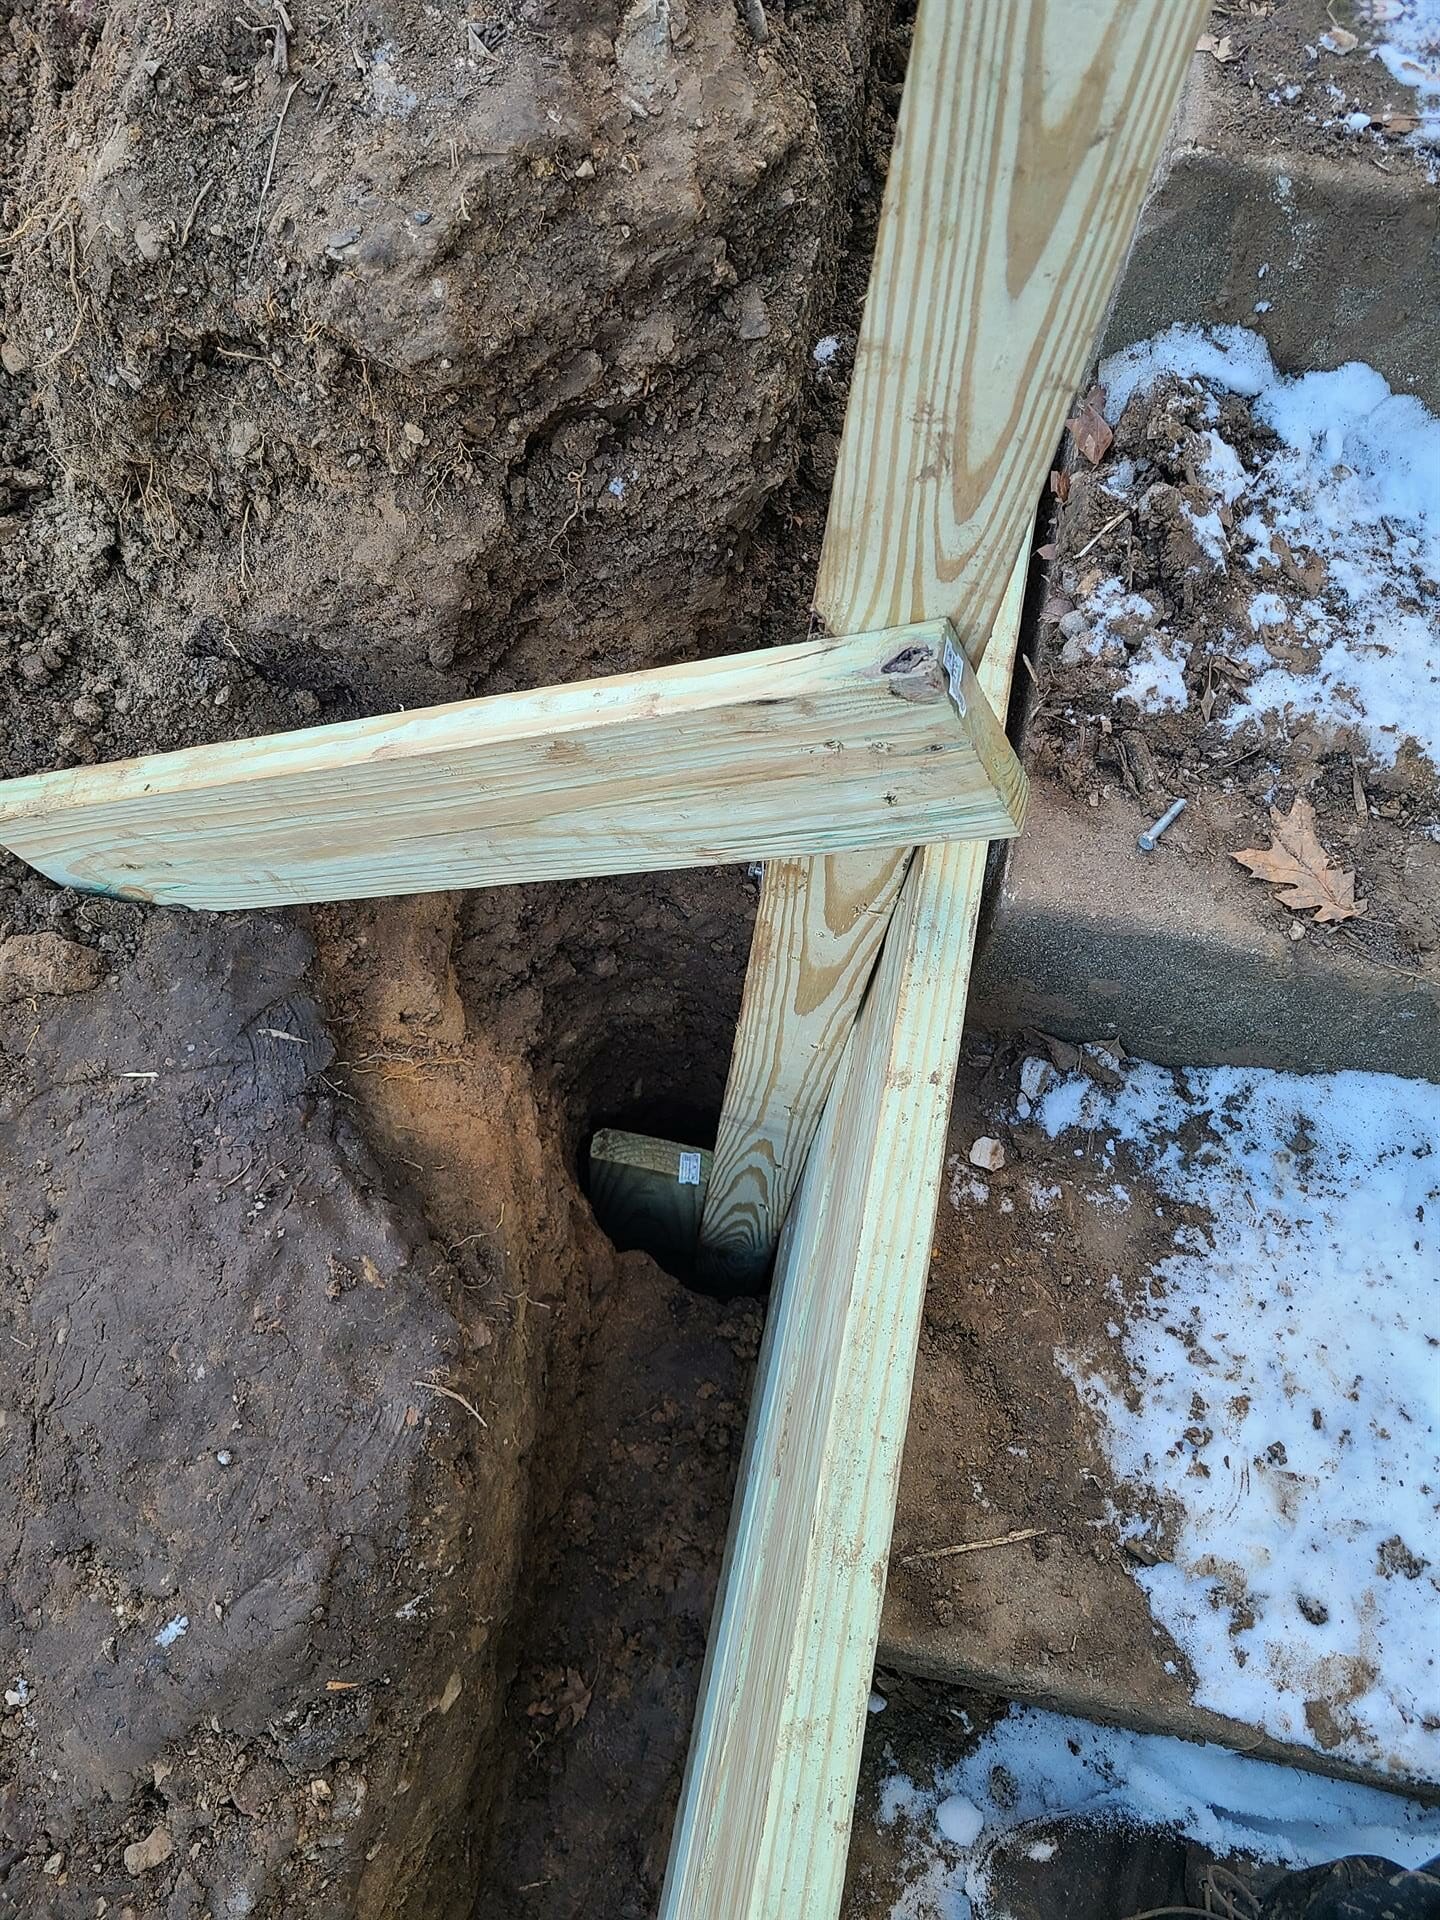 Using scrap wood to brace a wood post for a retaining wall